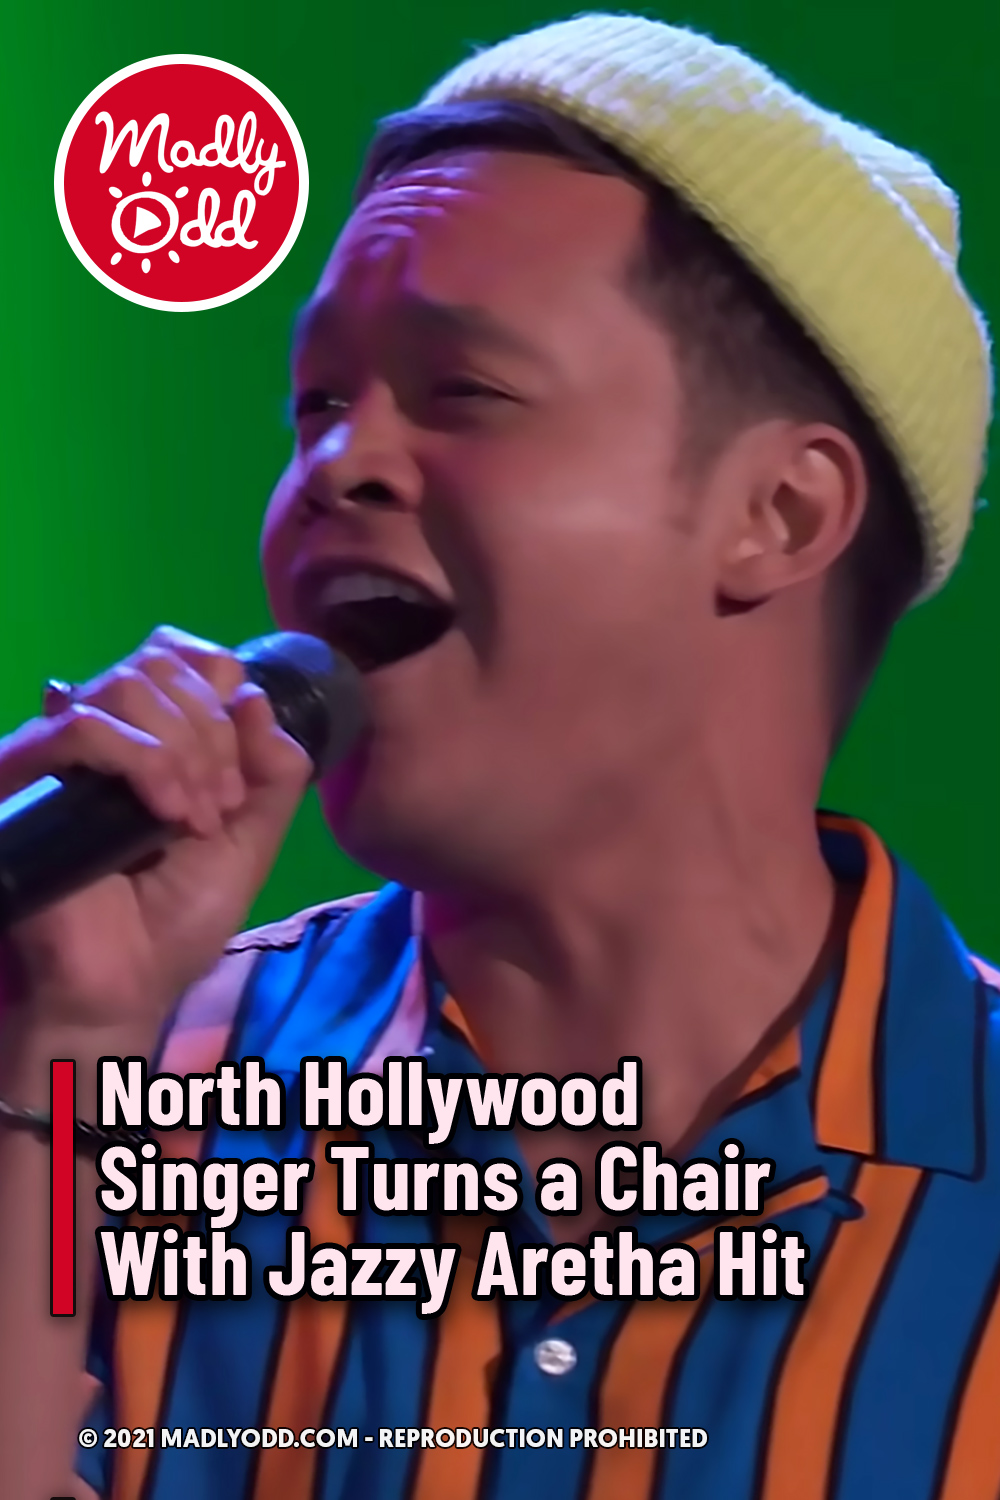 North Hollywood Singer Turns a Chair With Jazzy Aretha Hit